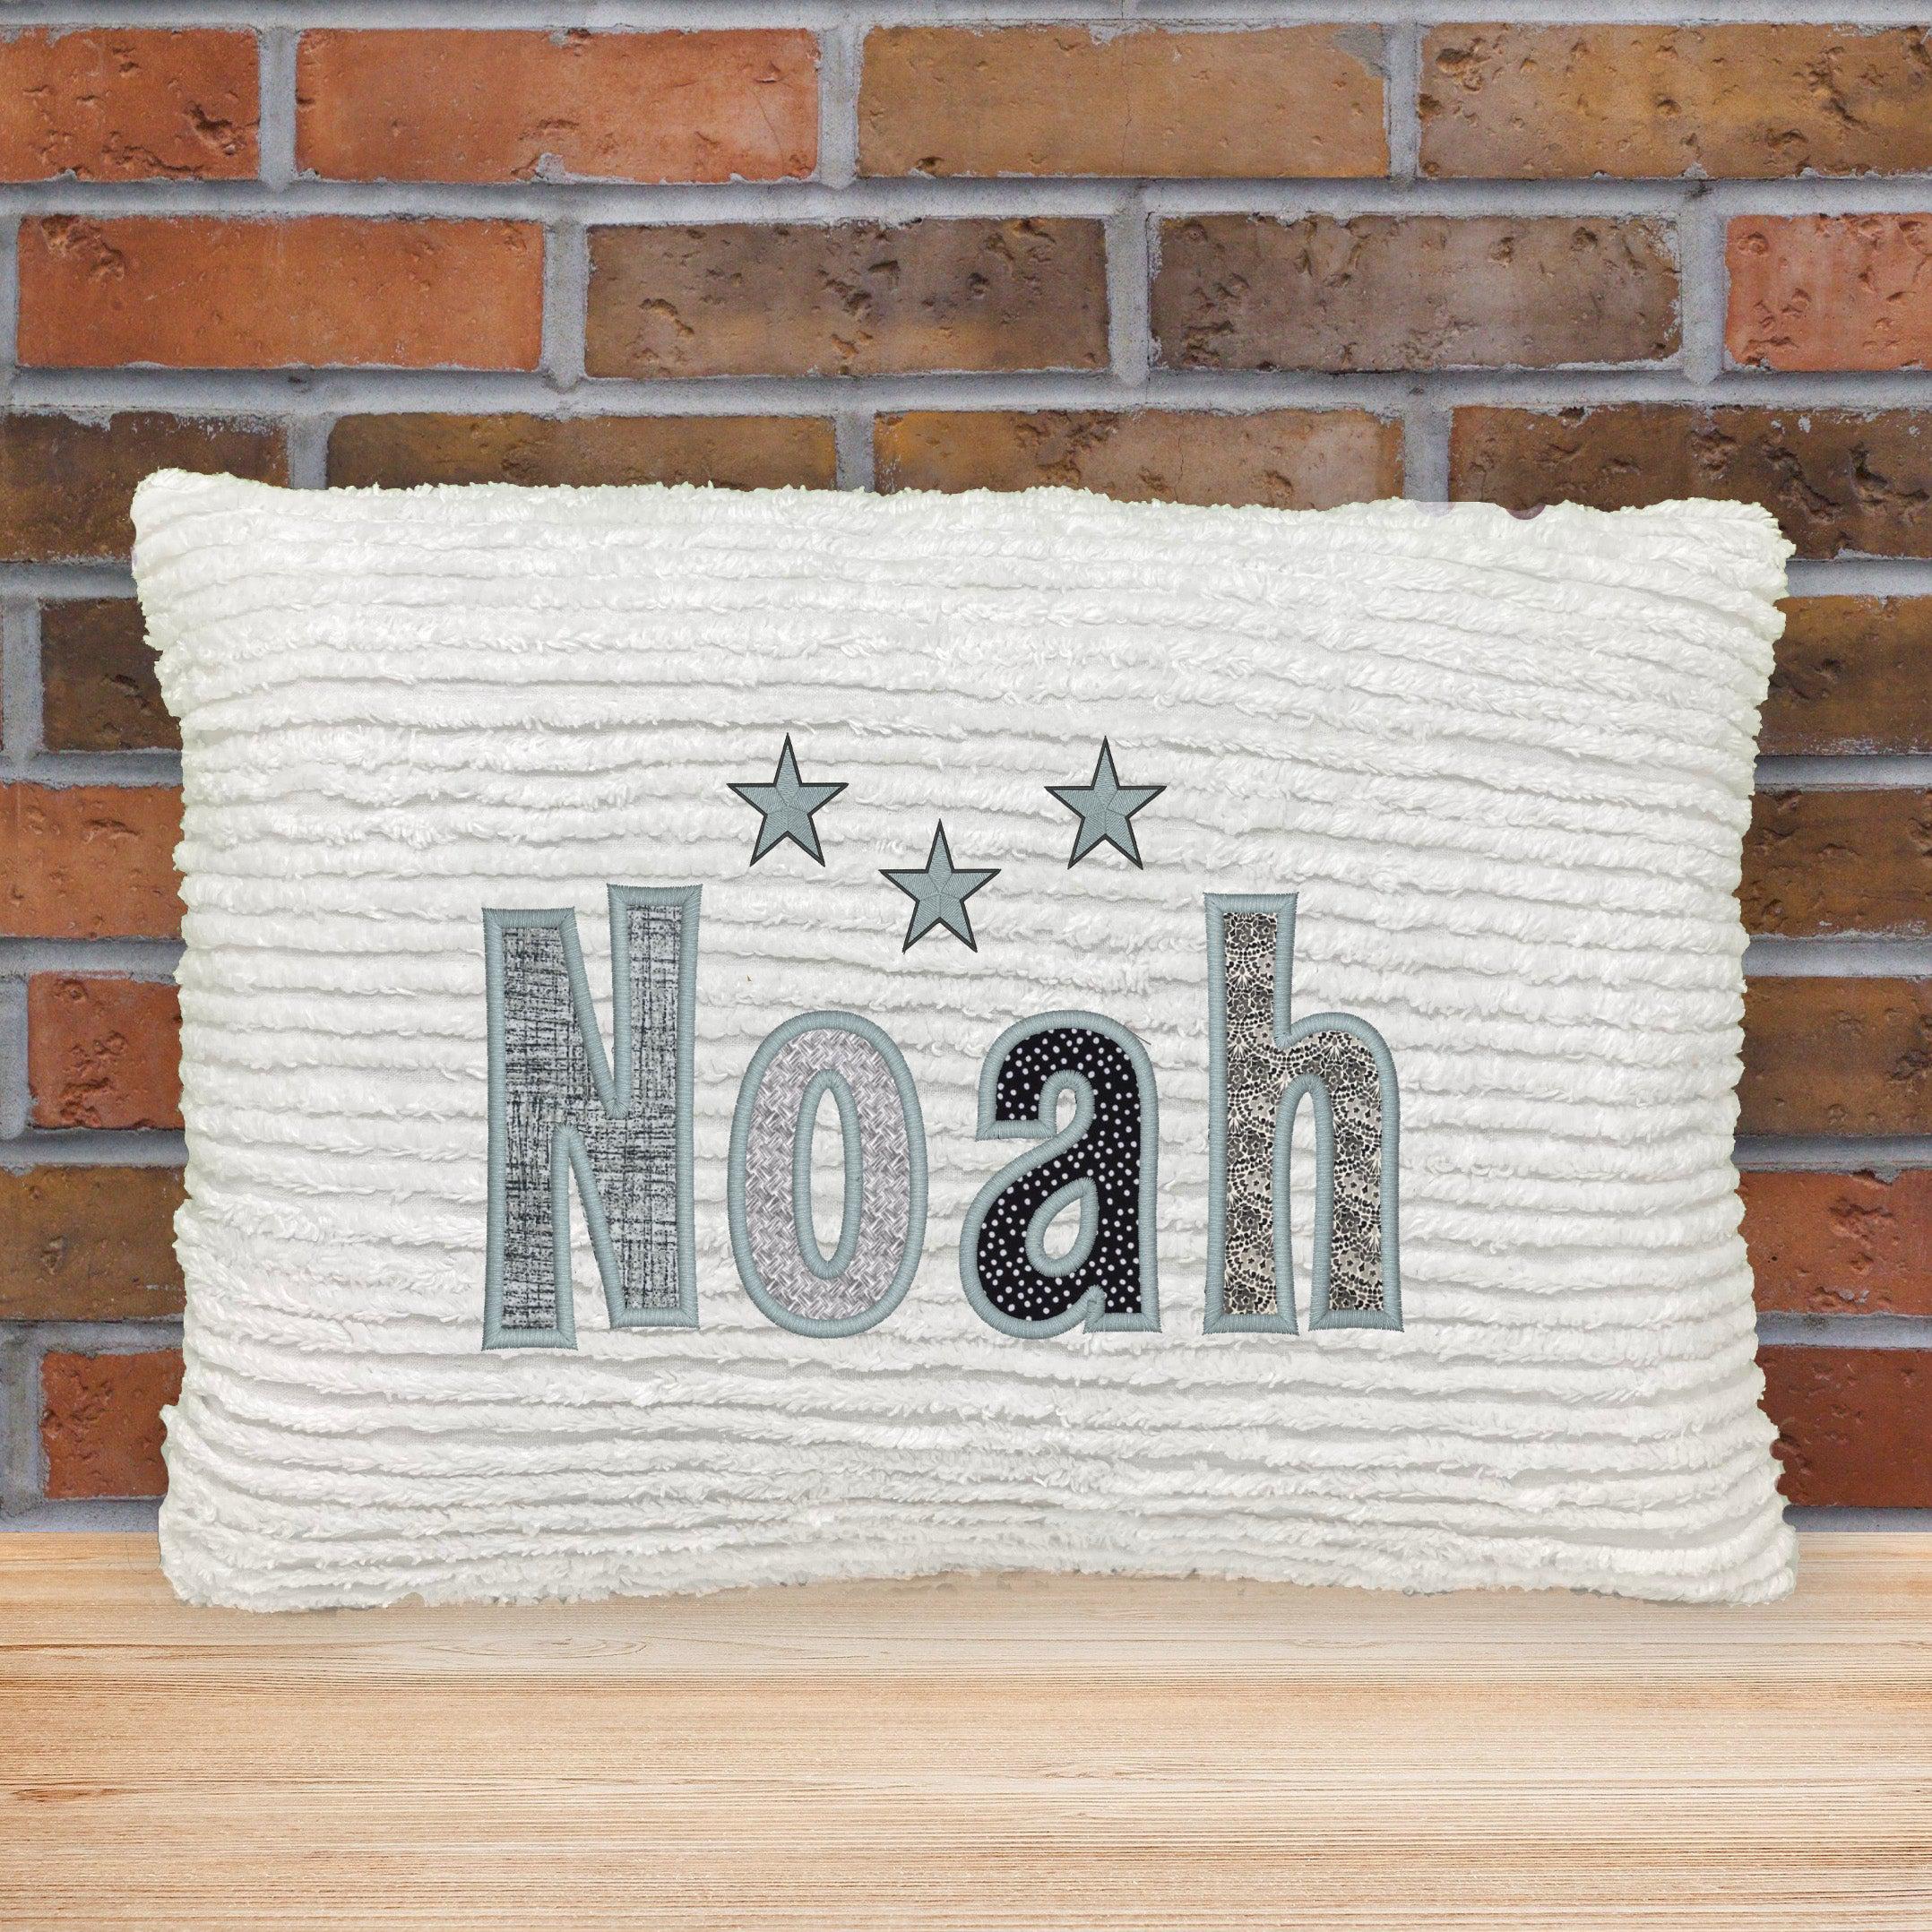 White chenille name pillow with gray and black appliqued letters and stars.